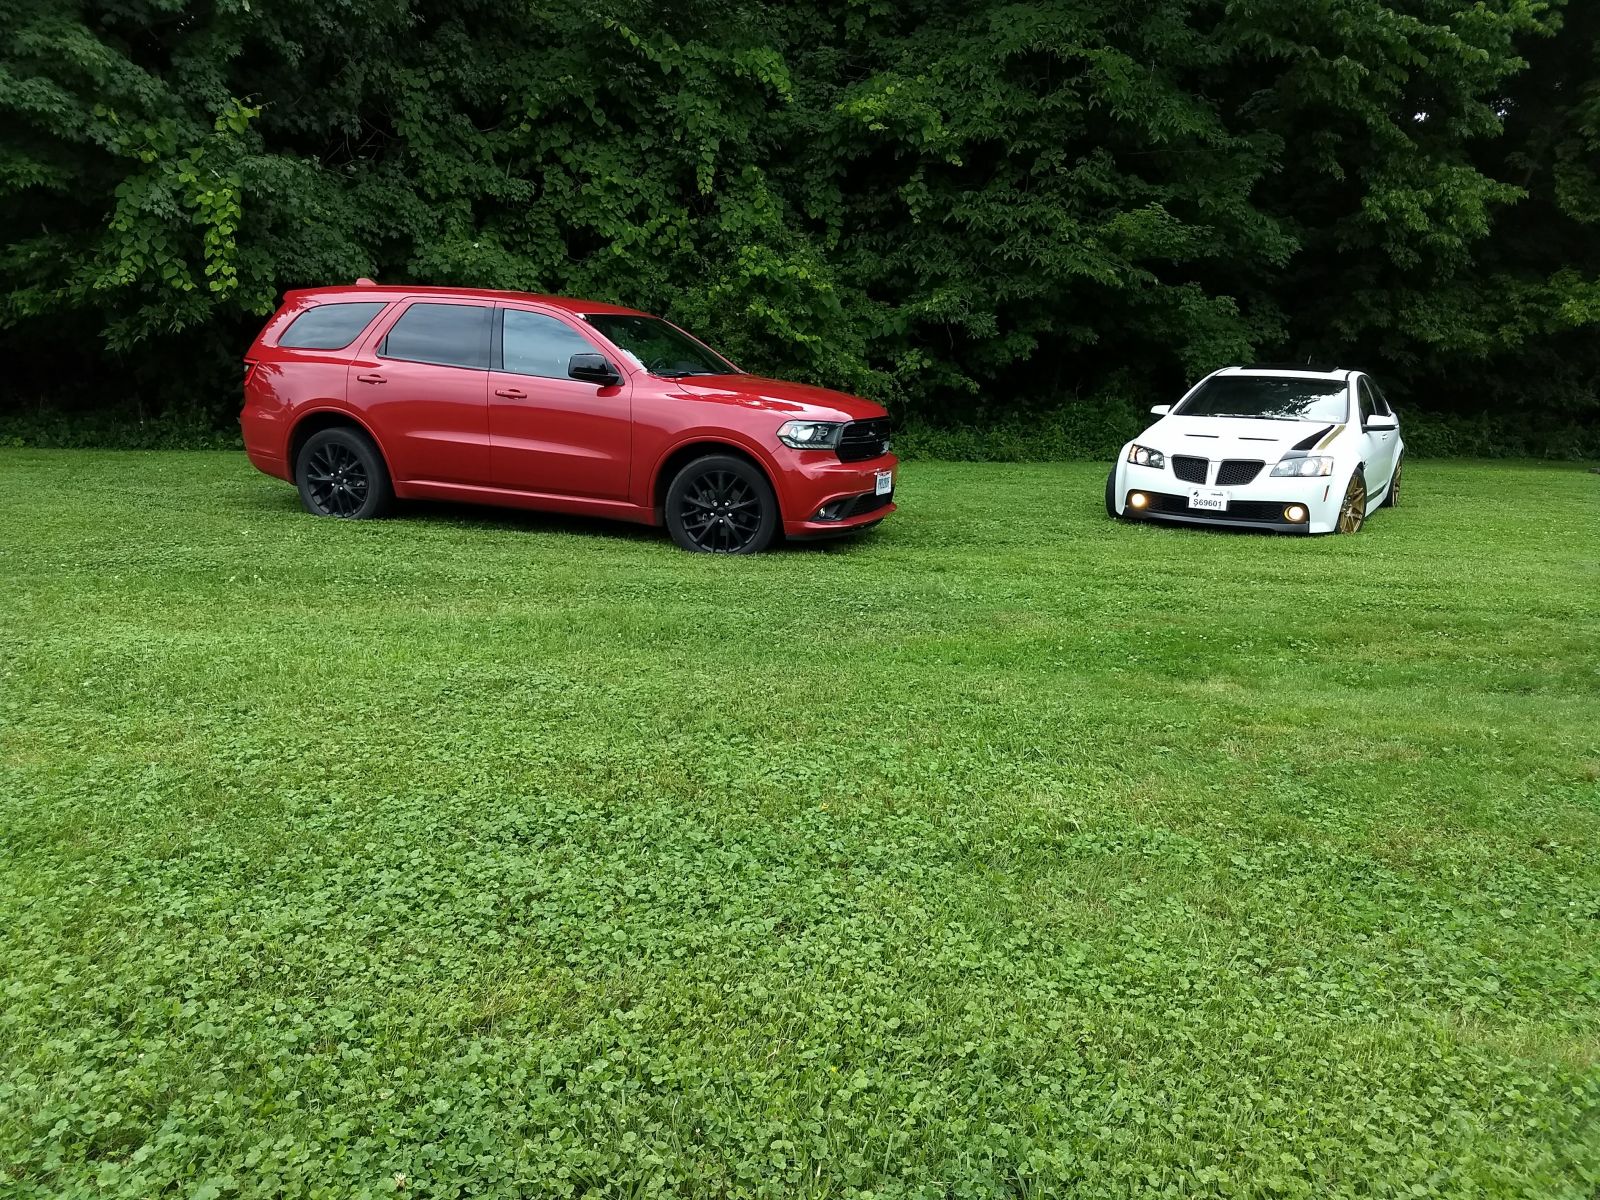 Lois and my friend’s G8 GT. His is much much much faster (dynoed at 376 RWHP)